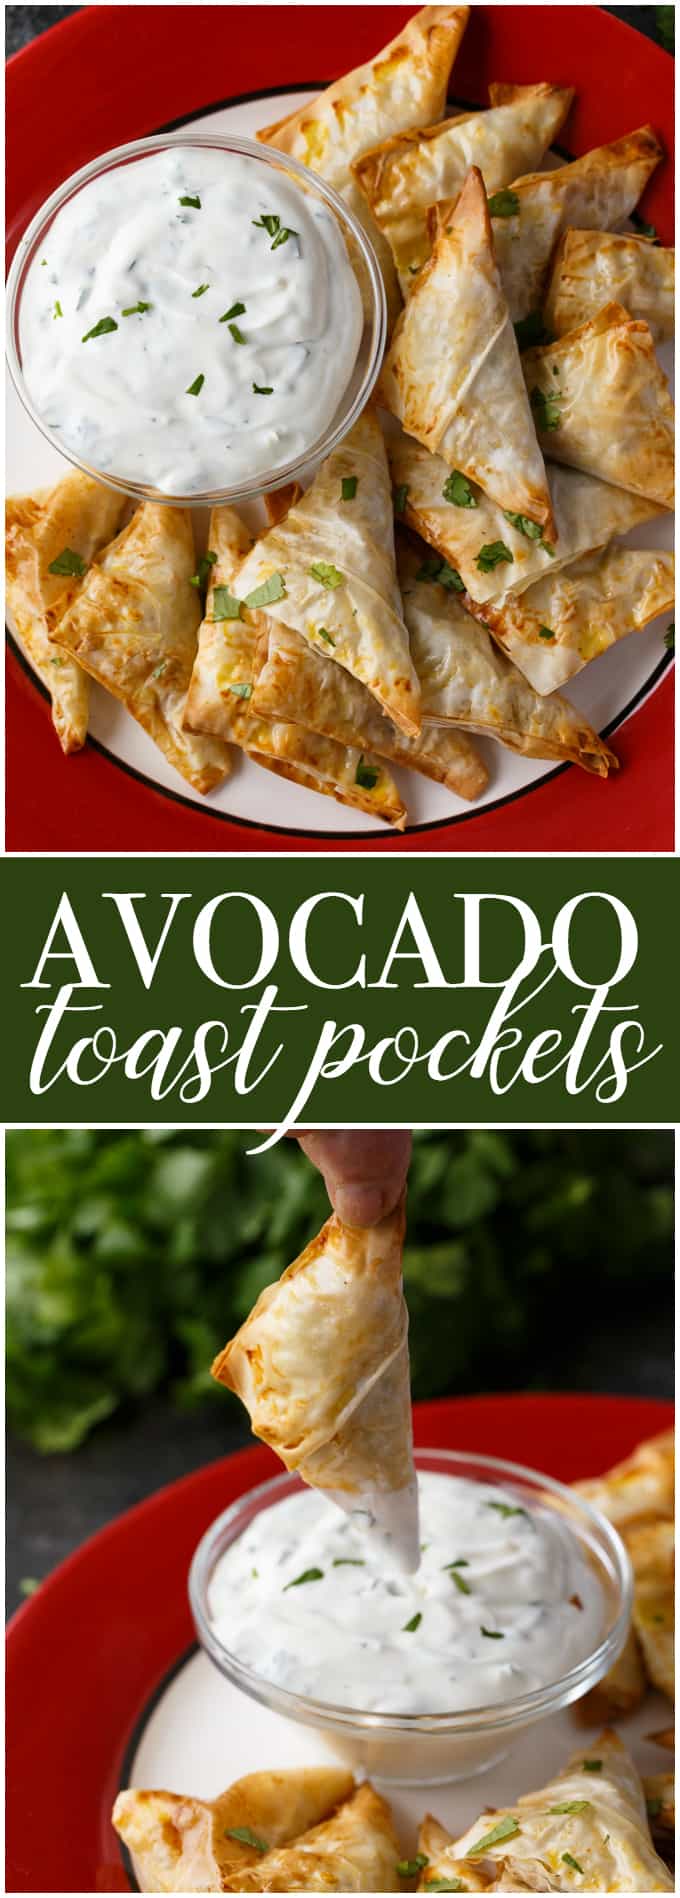 Avocado Toast Pockets - This brunch staple is wrapped in crispy phyllo dough for a new take on a trendy classic. Packed with corn, red onion, chili powder, and cilantro.